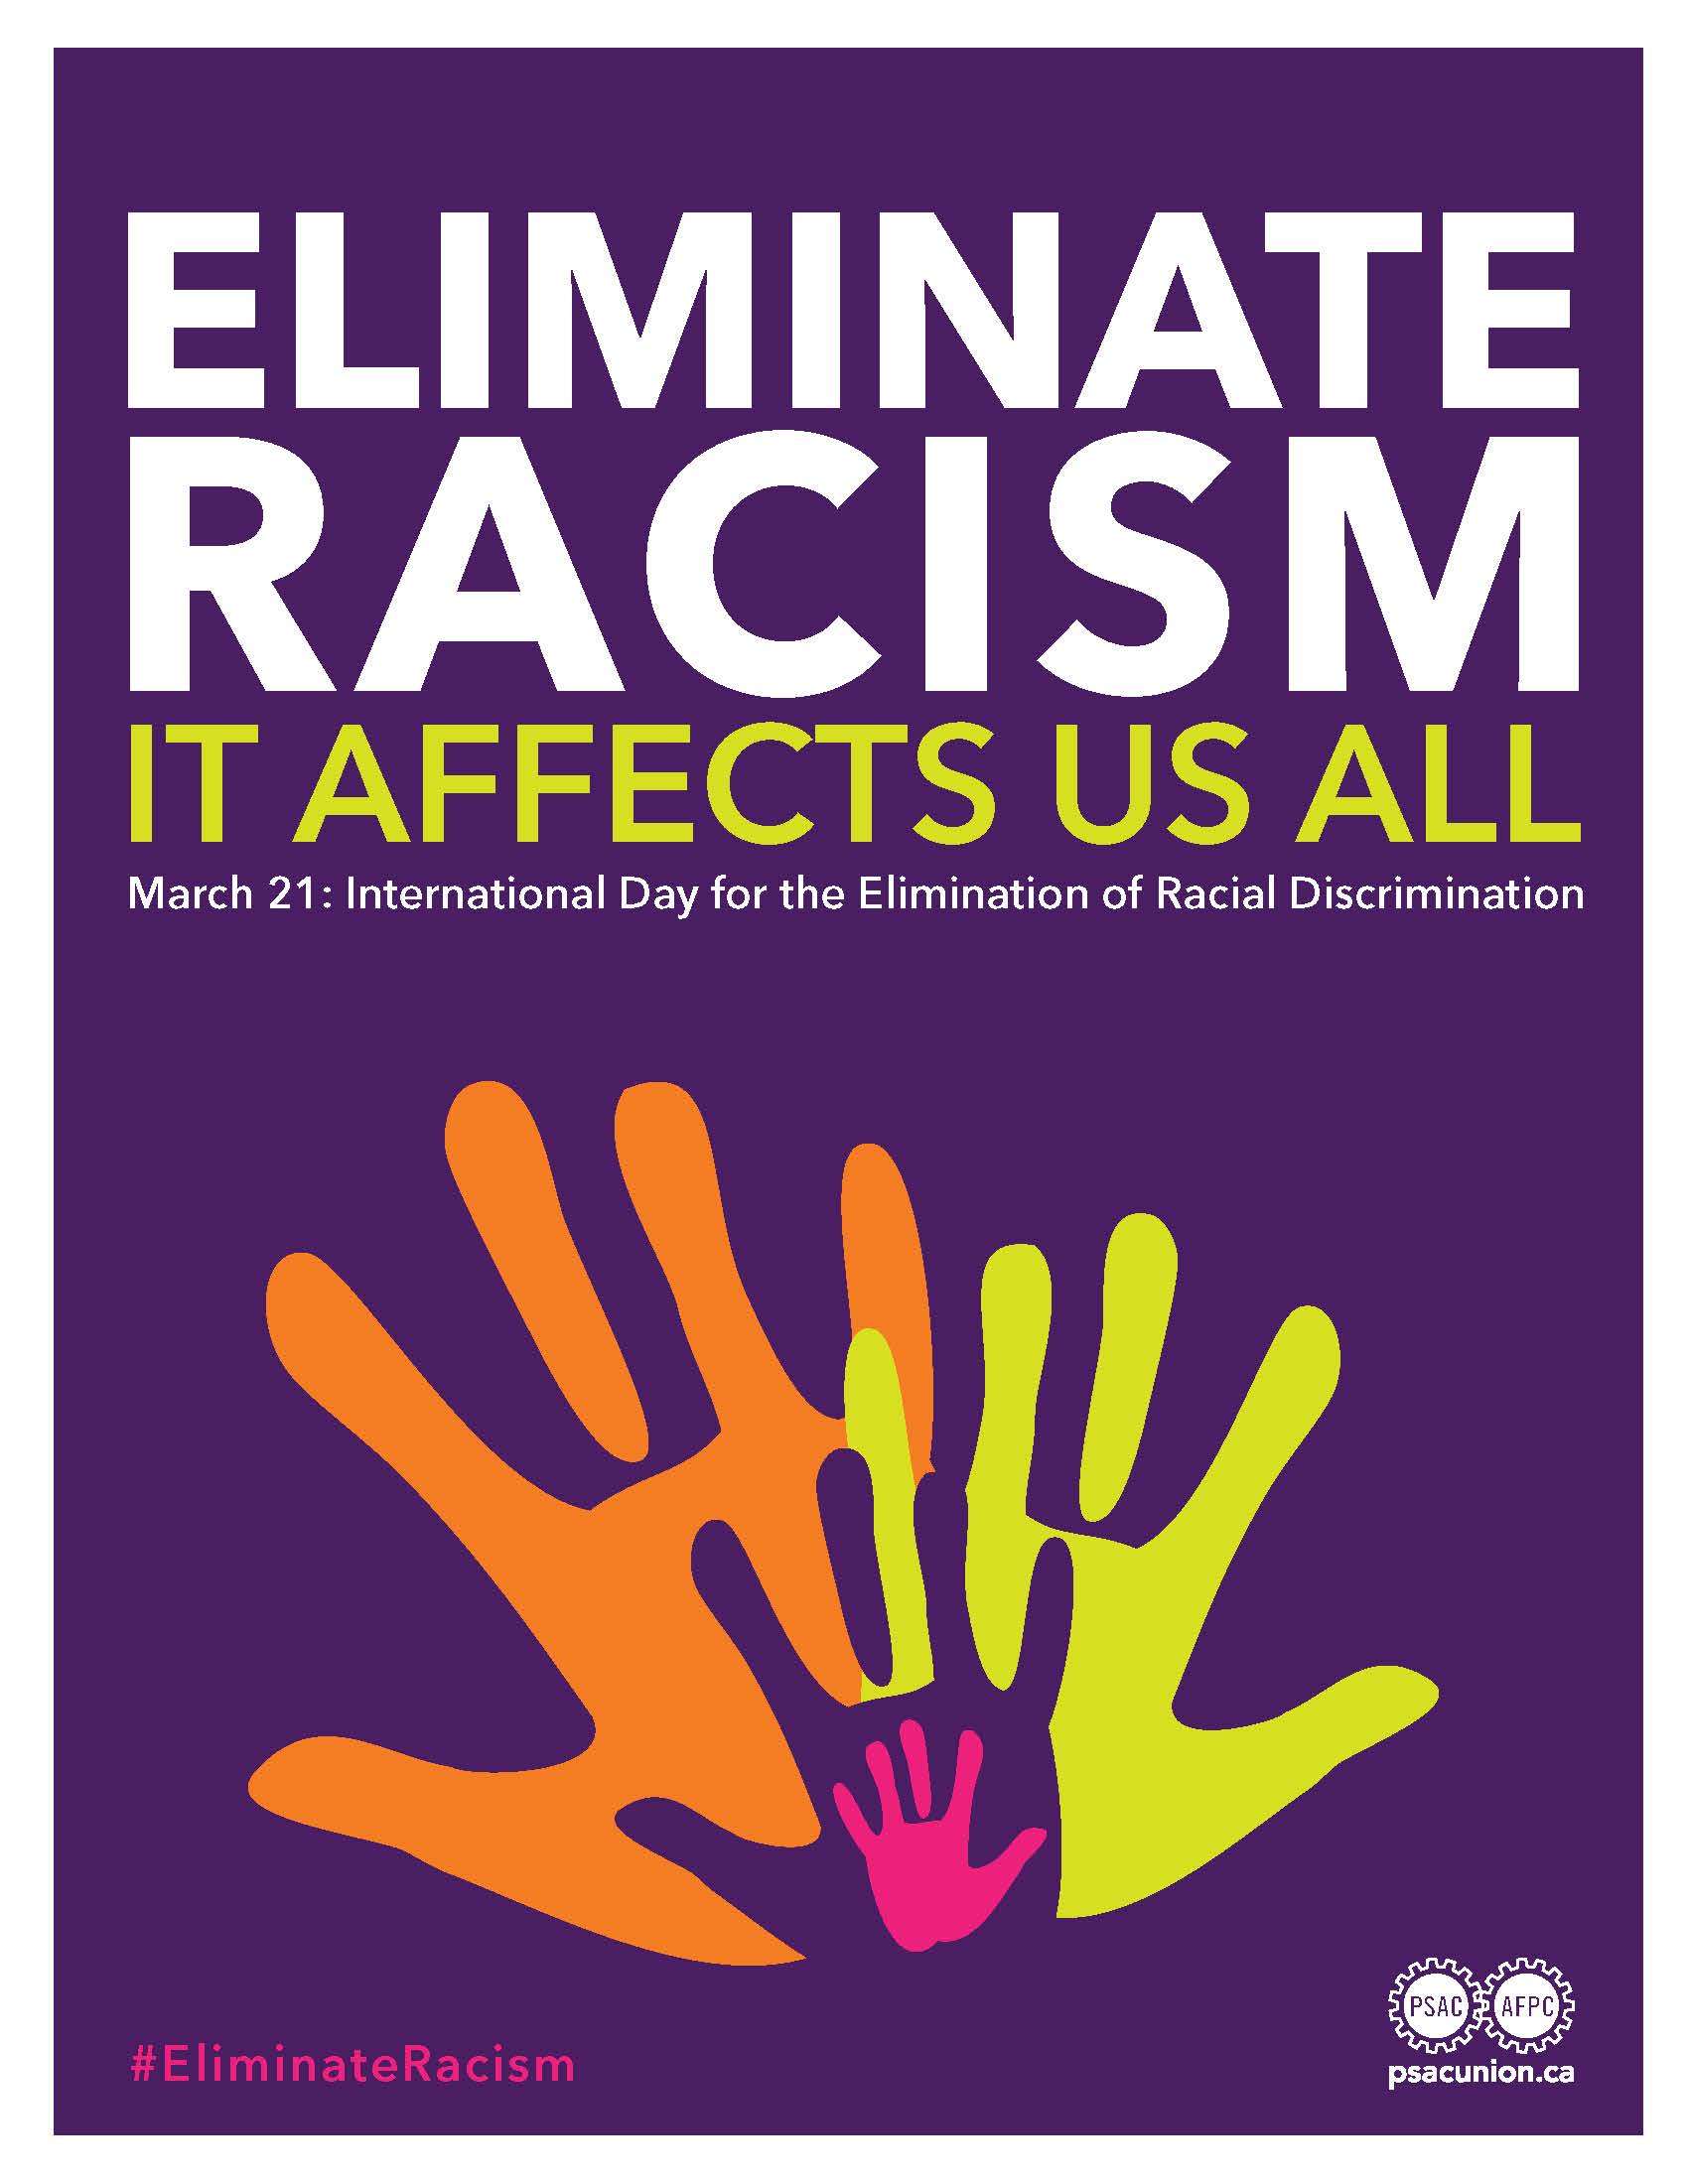 March 21st, International Day for the Elimination of Racial